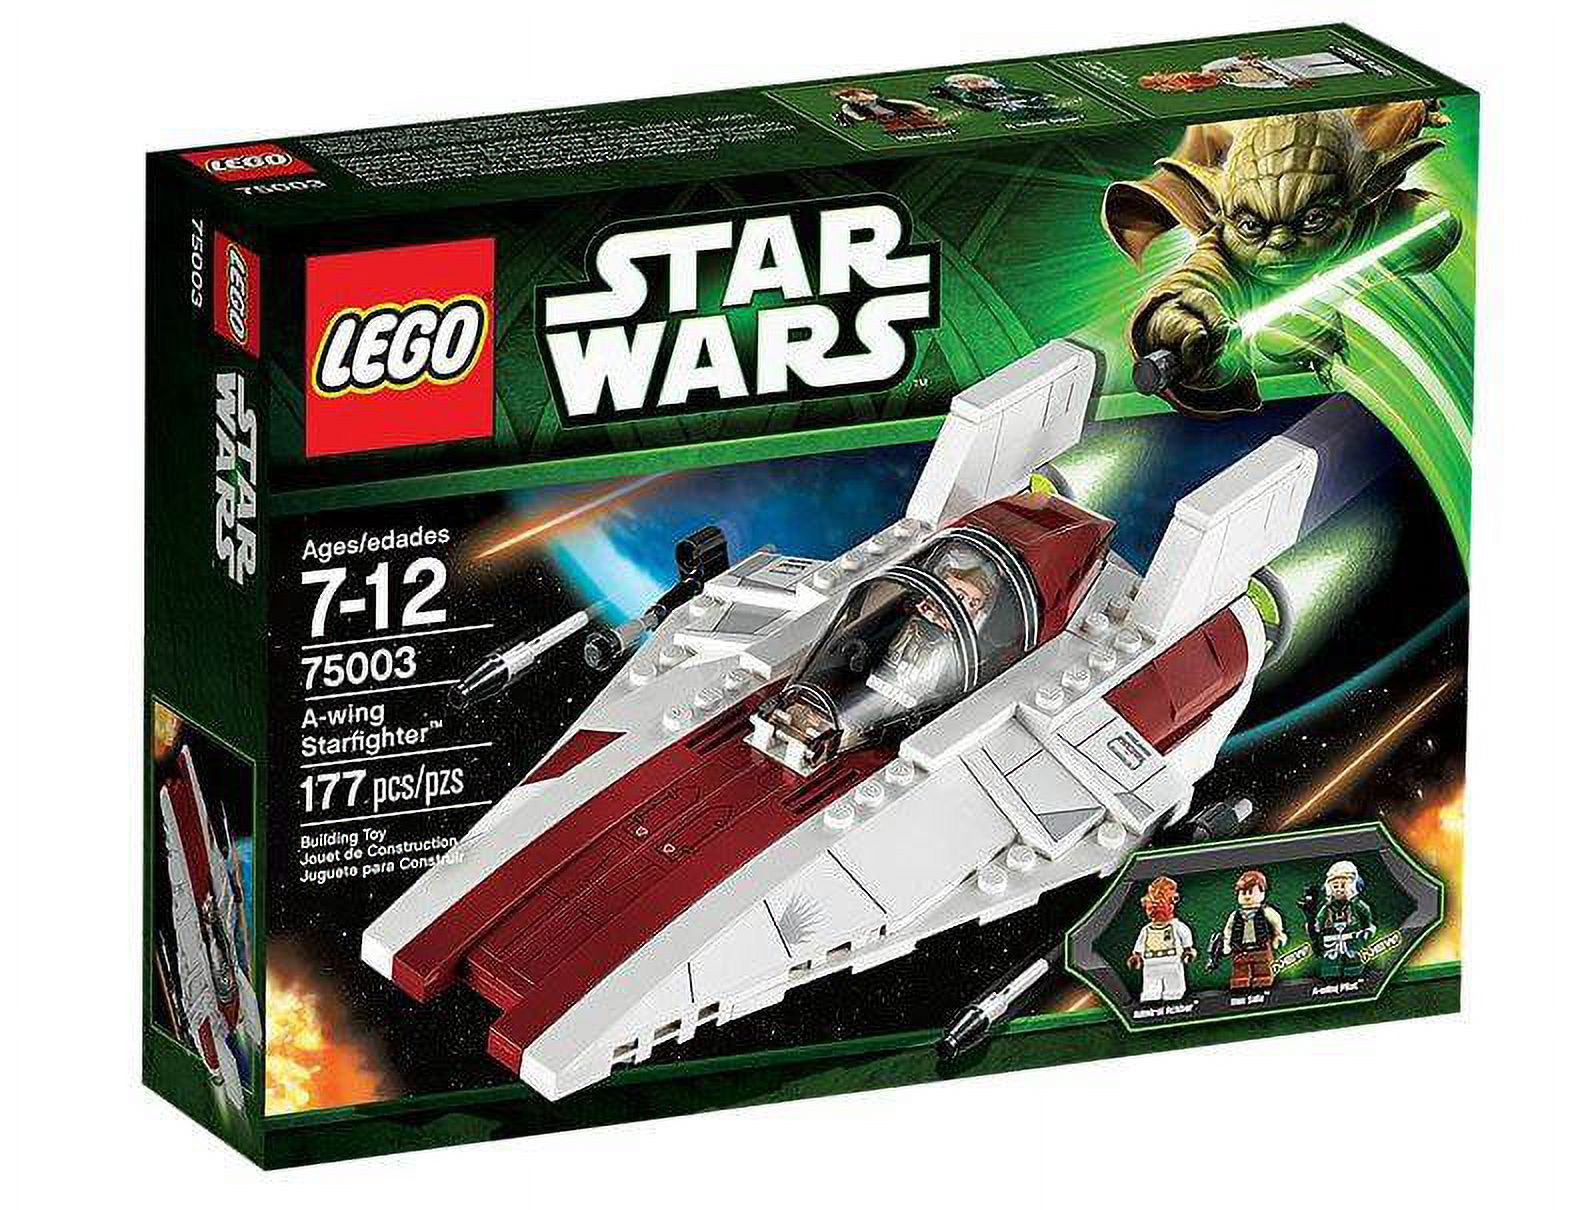 LEGO Star Wars A-wing Starfighter Play Set - image 2 of 7